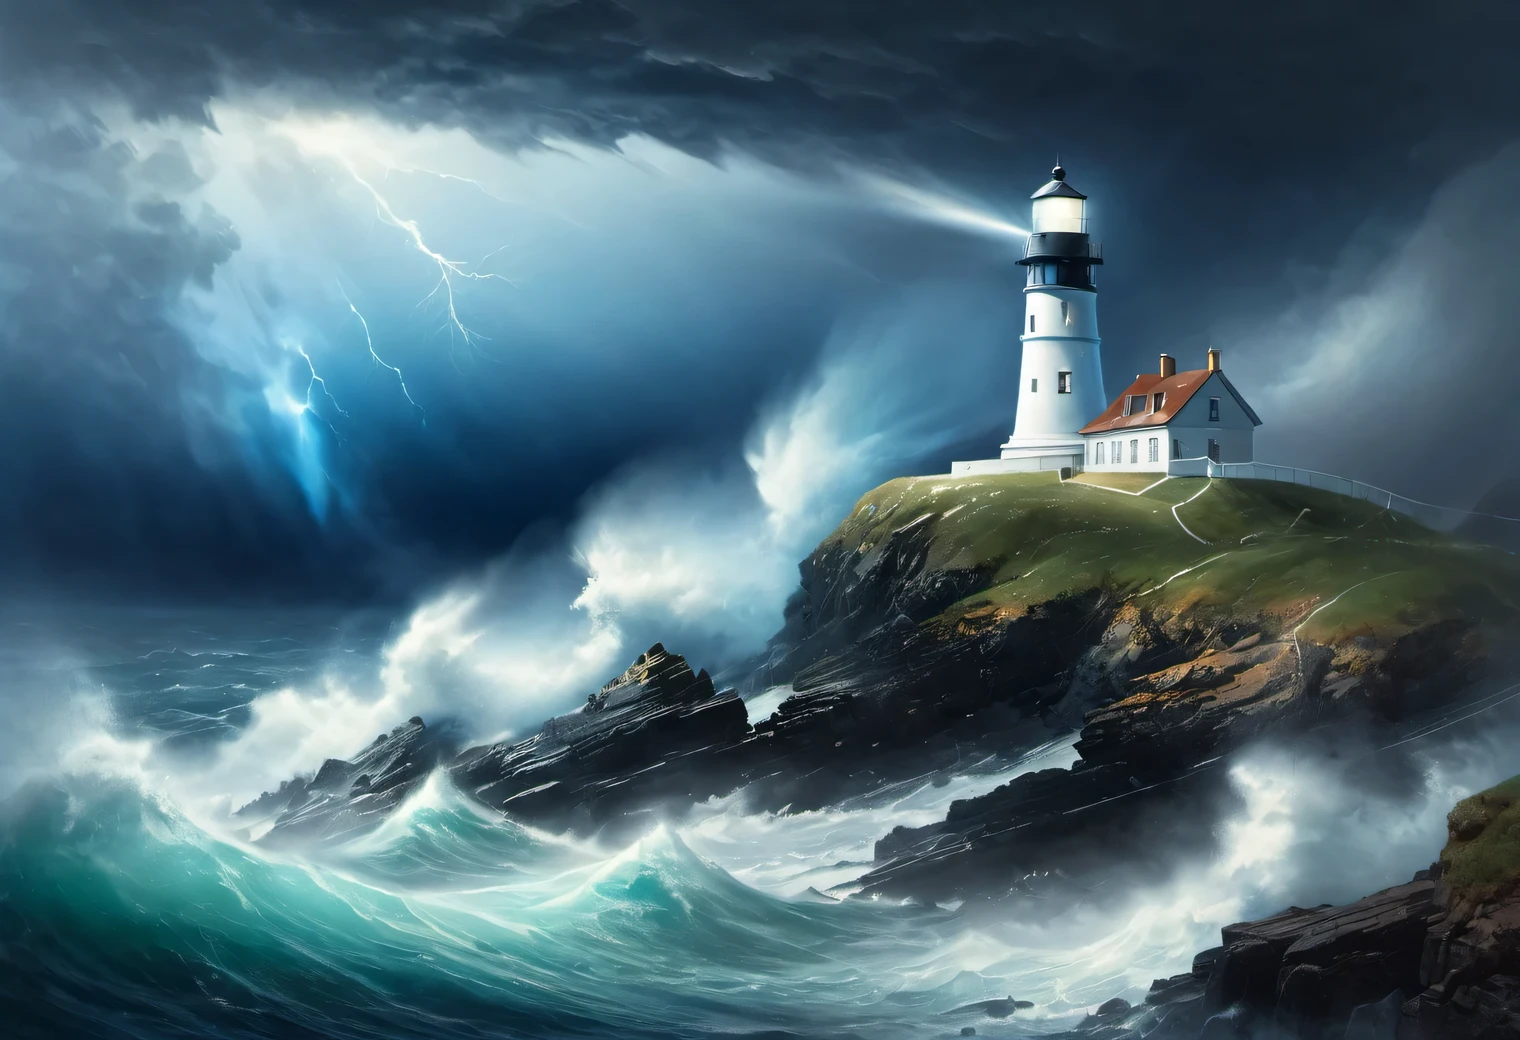 (dark green lighting Art:1.7050), Realistic painting in dark a stormy tones, (sea a storm fog: 1.2), (the wind carries sea spray and foam:1.7), the dark a stormy sky is illuminated by the pale light of a lighthouse, (Double exposure effect:1.5), (1 Lighthouse on the edge of a cliff:1.5 glows with bright blue rays: 1.3505), (a stormy sea: 1.755), Strong (a storm: 1.3050), Strong winds:1.250), Blue Highlight, (ray tracing: 1.2), (Tyndall effect: 1.4055 lighthouse beams:1.4), High detail, a storm haze, Texture smoothing, outline blur, a storm palette, Ivan Aivazovsky, in combination with (surrealism: 1.6), (the Strongest a storm of the century:1.5), (low visibility:1.7)